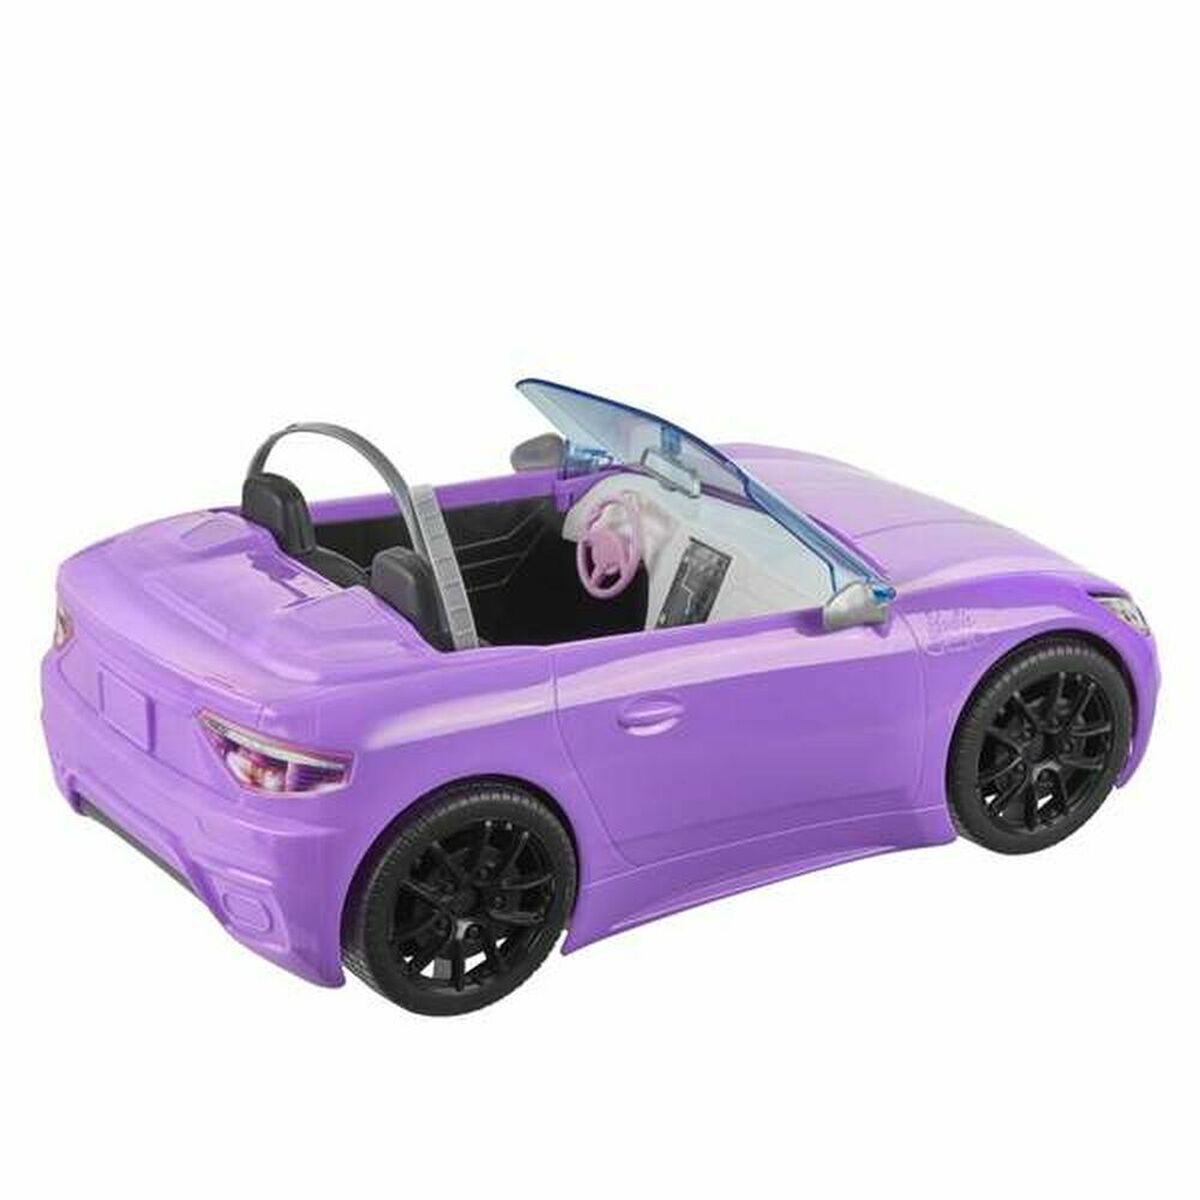 Puppe Mattel Barbie And Her Purple Convertible